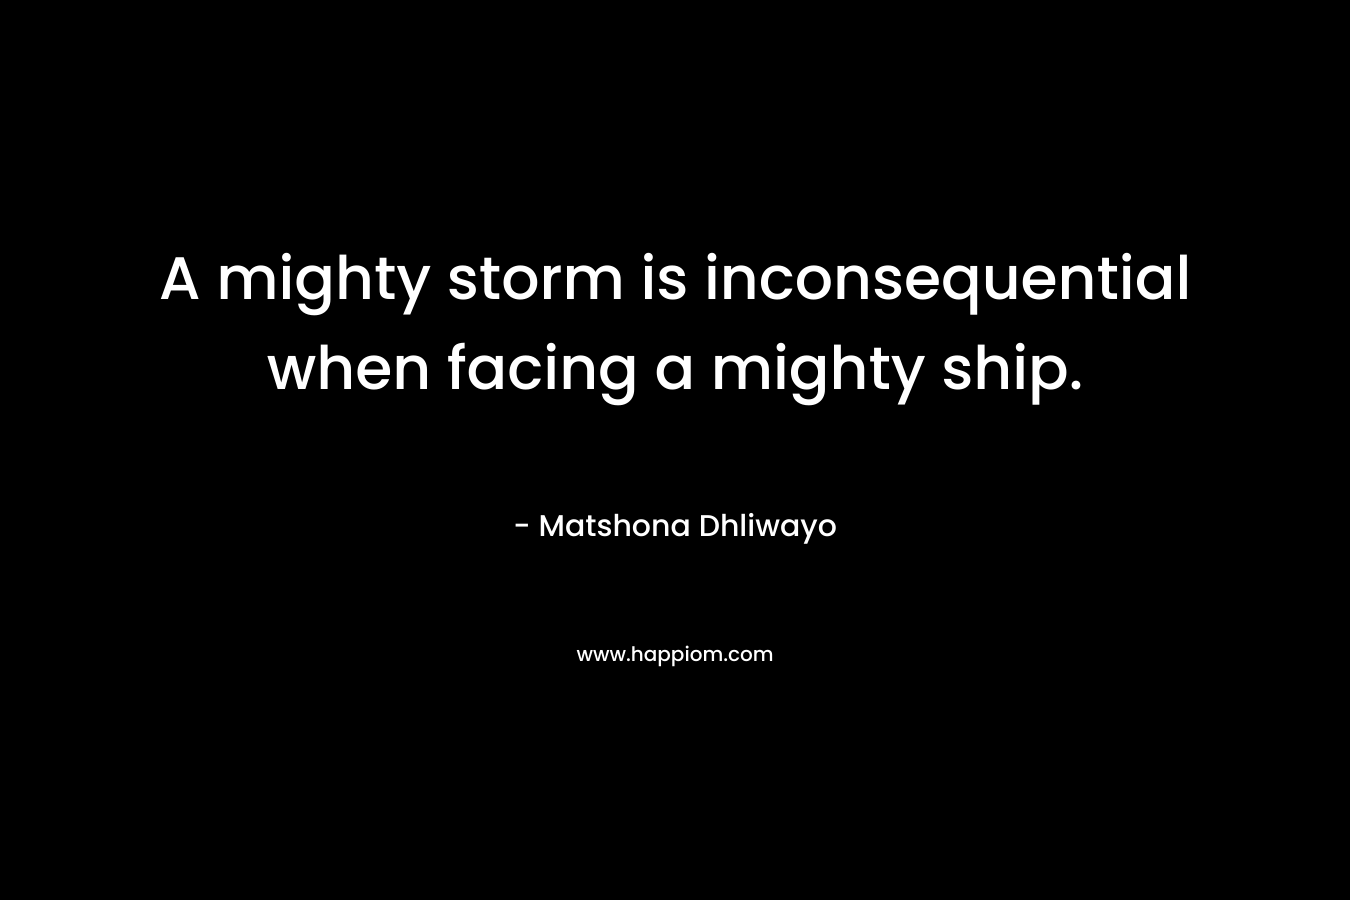 A mighty storm is inconsequential when facing a mighty ship.